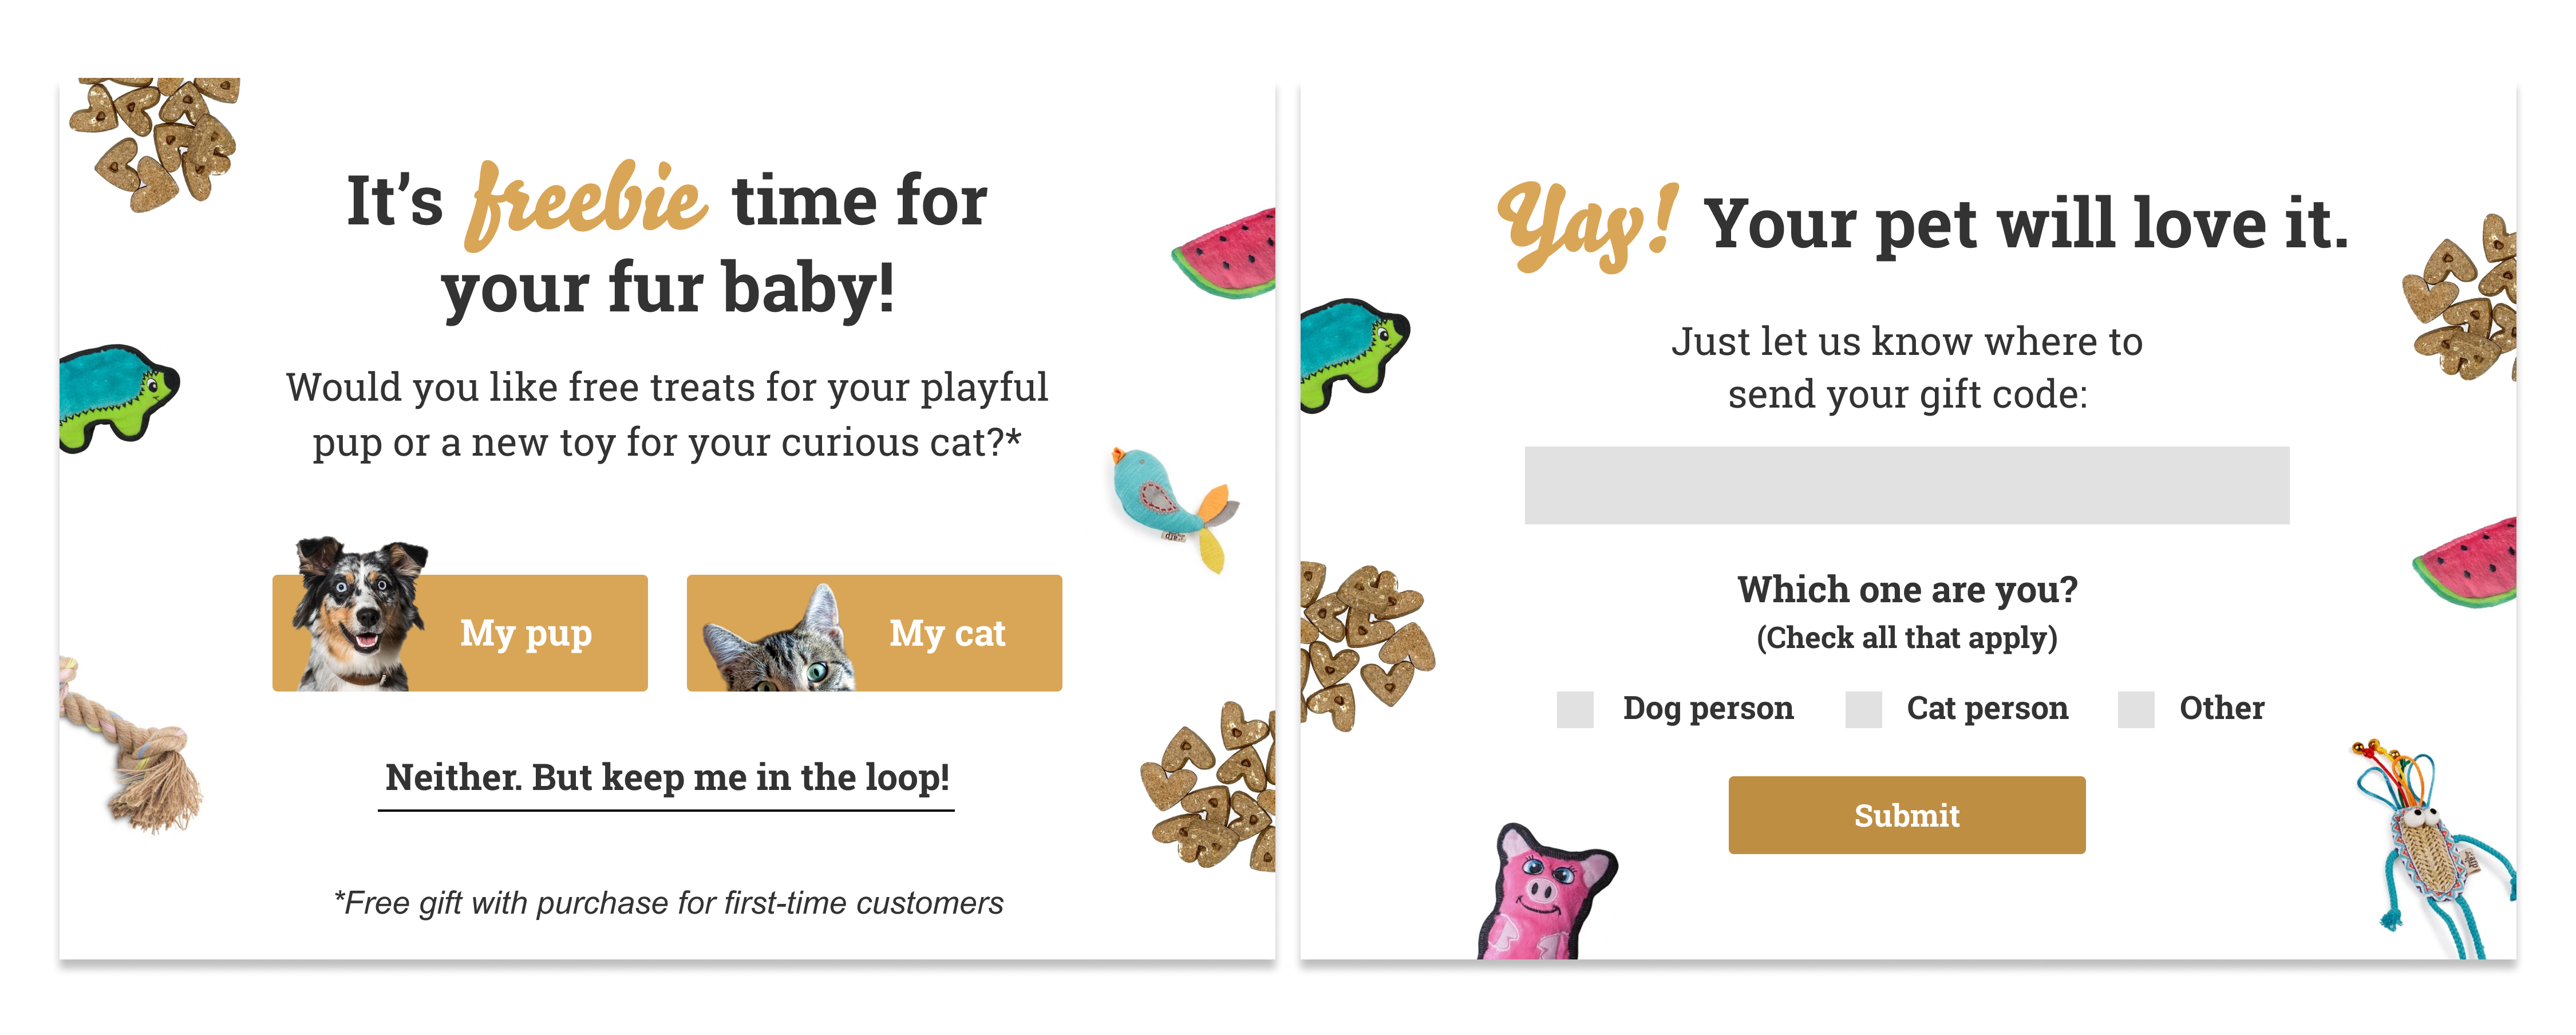 Tomlinson's Feed pop-up that asks customers if they want a dog treat or cat toy. Then it asks them if they're a dog person, cat person, or if they have a different kind of pet.